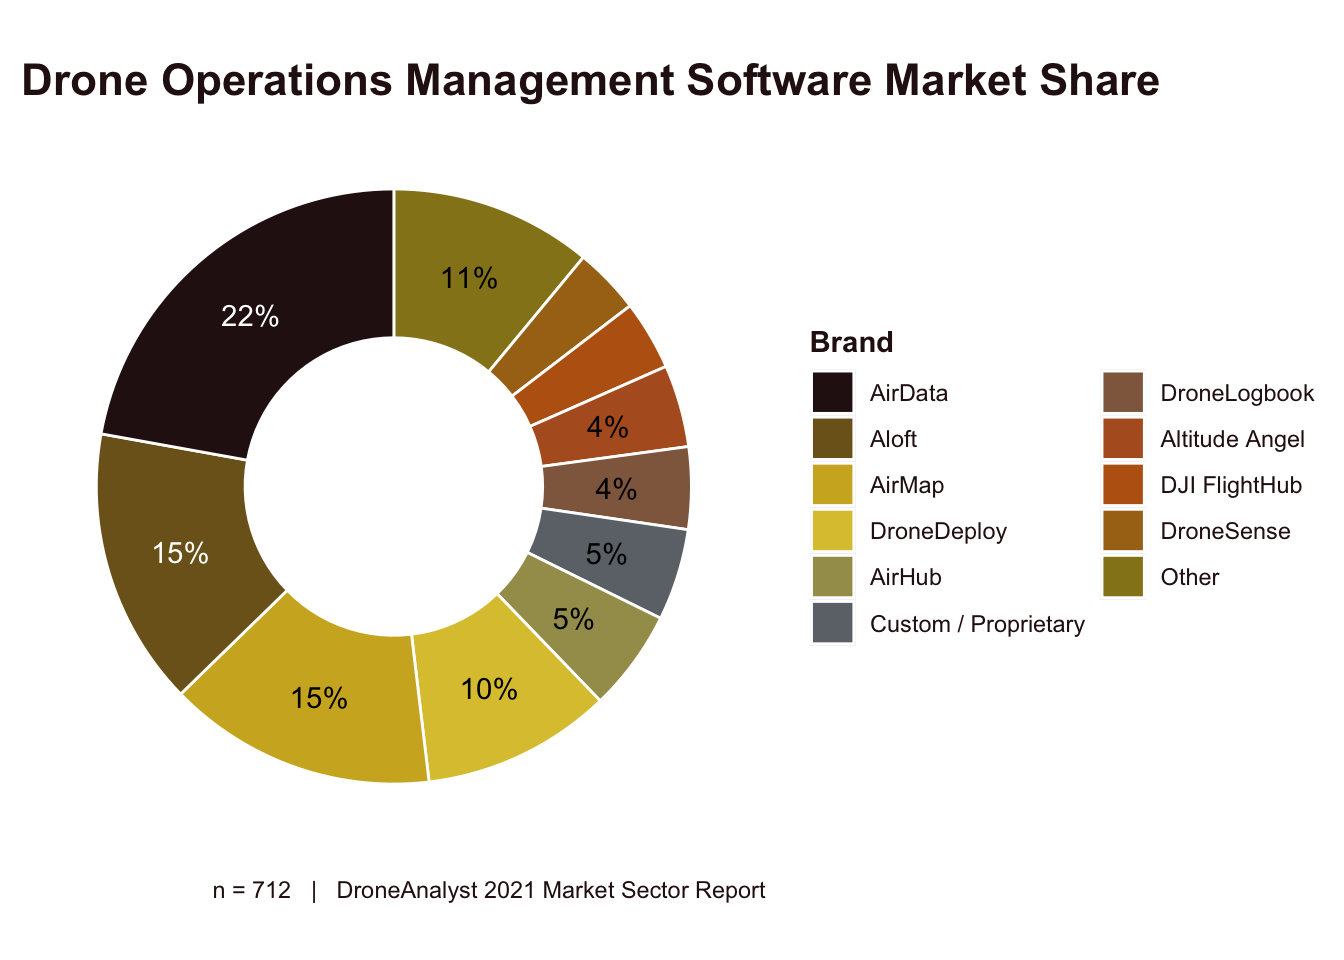 Drone Operations Management Software Market Share